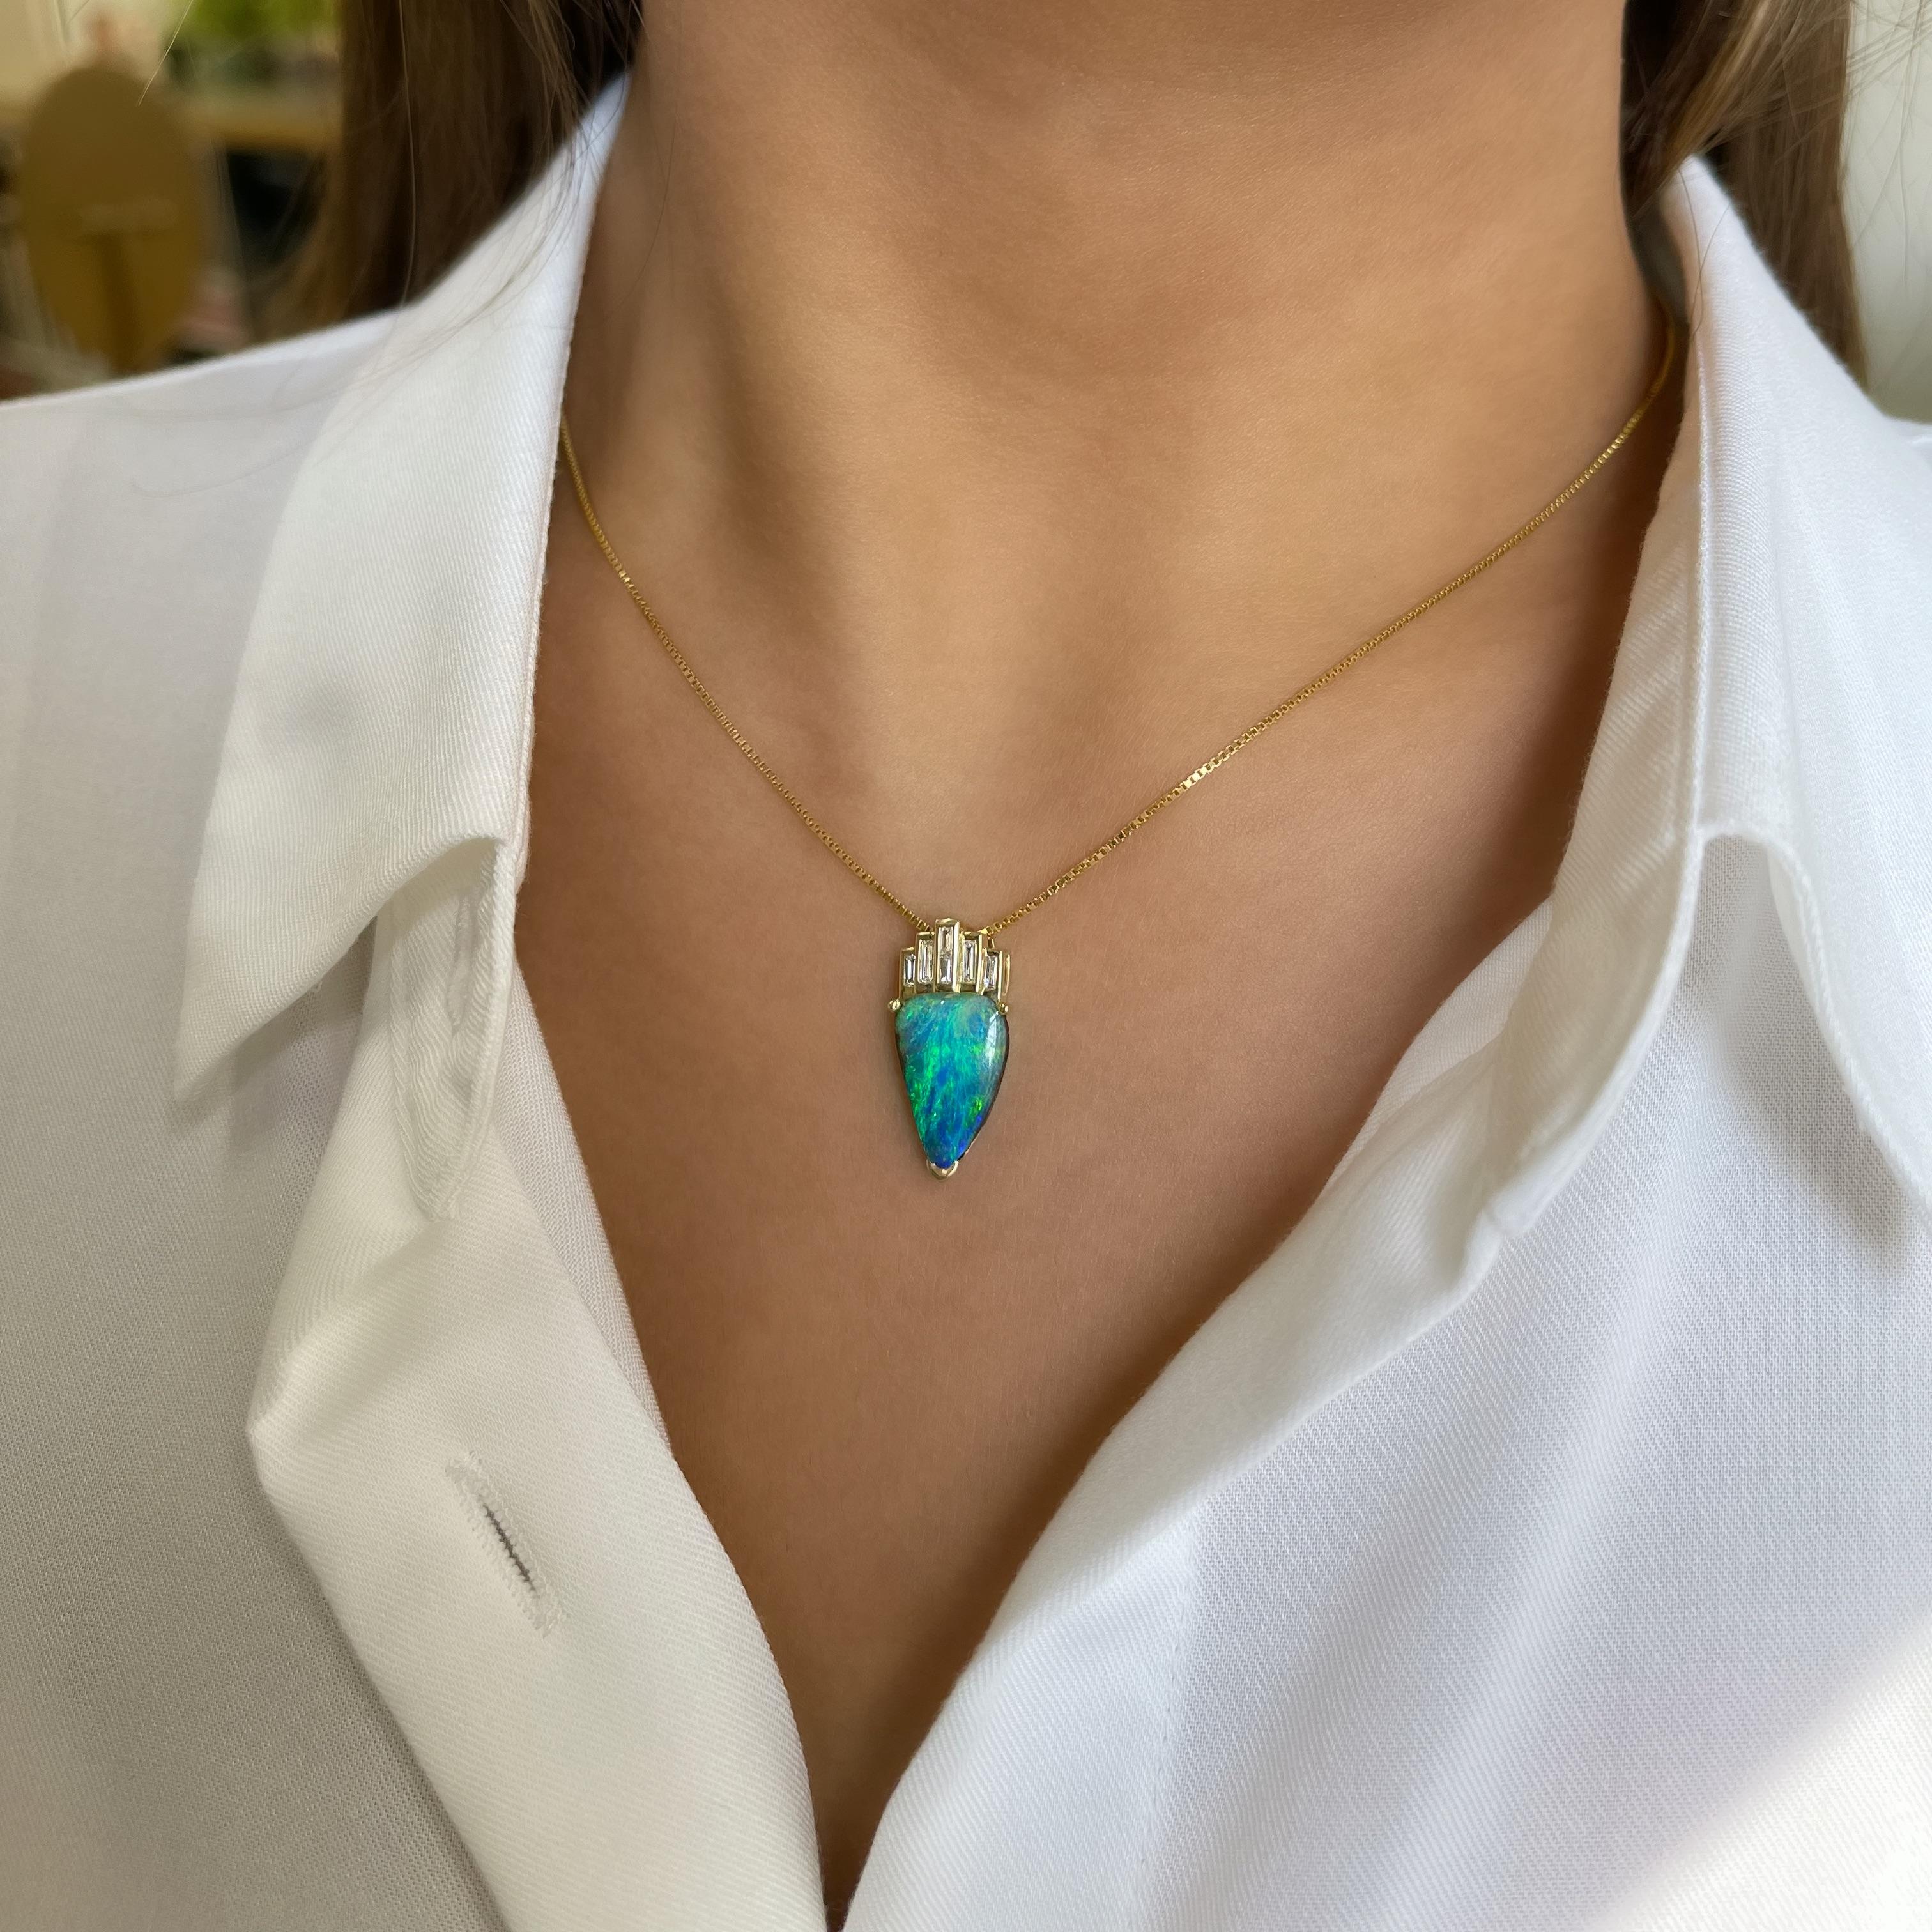 Beyond beautiful, ‘The Crown’ opal pendant features a radiant boulder opal (4.18ct) sourced from Winton opal fields in NSW, Australia. The piece enabling the remarkable green-blue colour-play of the precious opal gemstone to shine. The smooth 18K